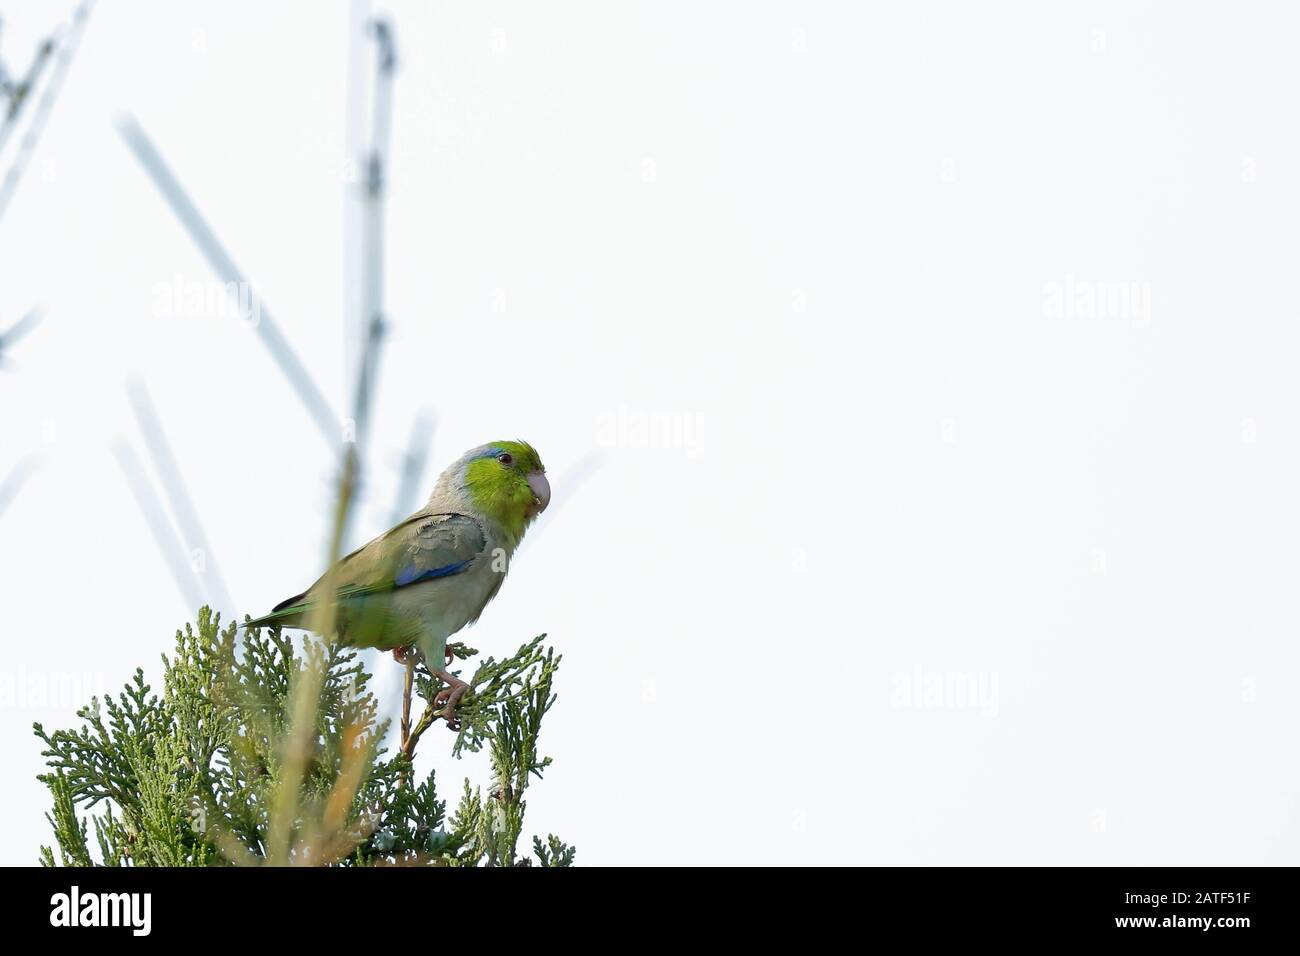 PACIFIC PARROTLET (Forpus coelestis), beautiful bird perched on the branch of a cypress in freedom. Lima - Peru Stock Photo